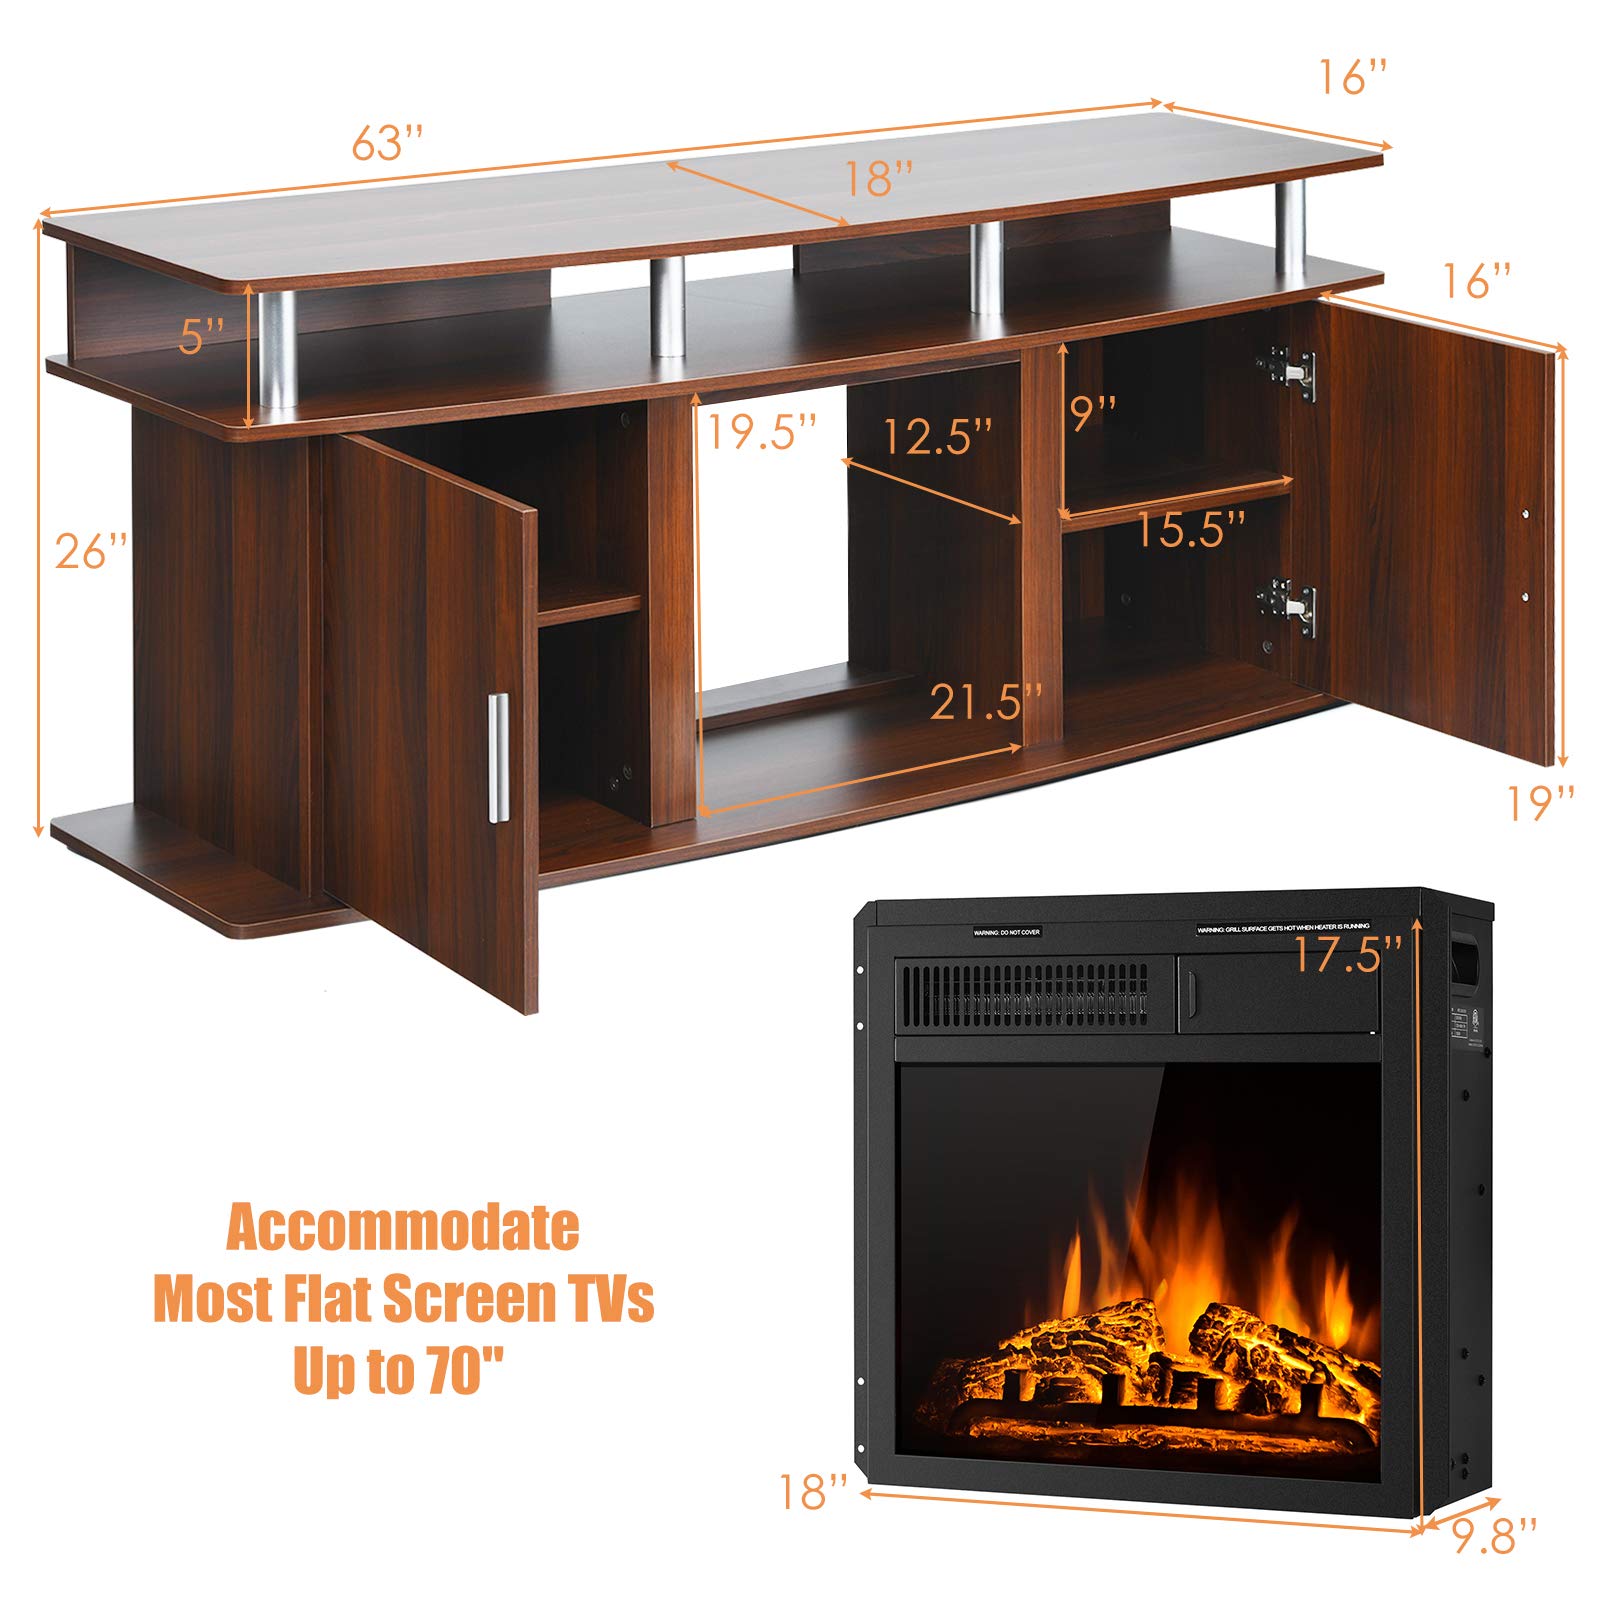 Tangkula Fireplace TV Stand, Living Room Media Console Table w/1500W Electric Fireplace for TVs up to 70 Inches, Modern TV Console w/Fireplace, Remote Control & Adjustable Brightness (Cherry)